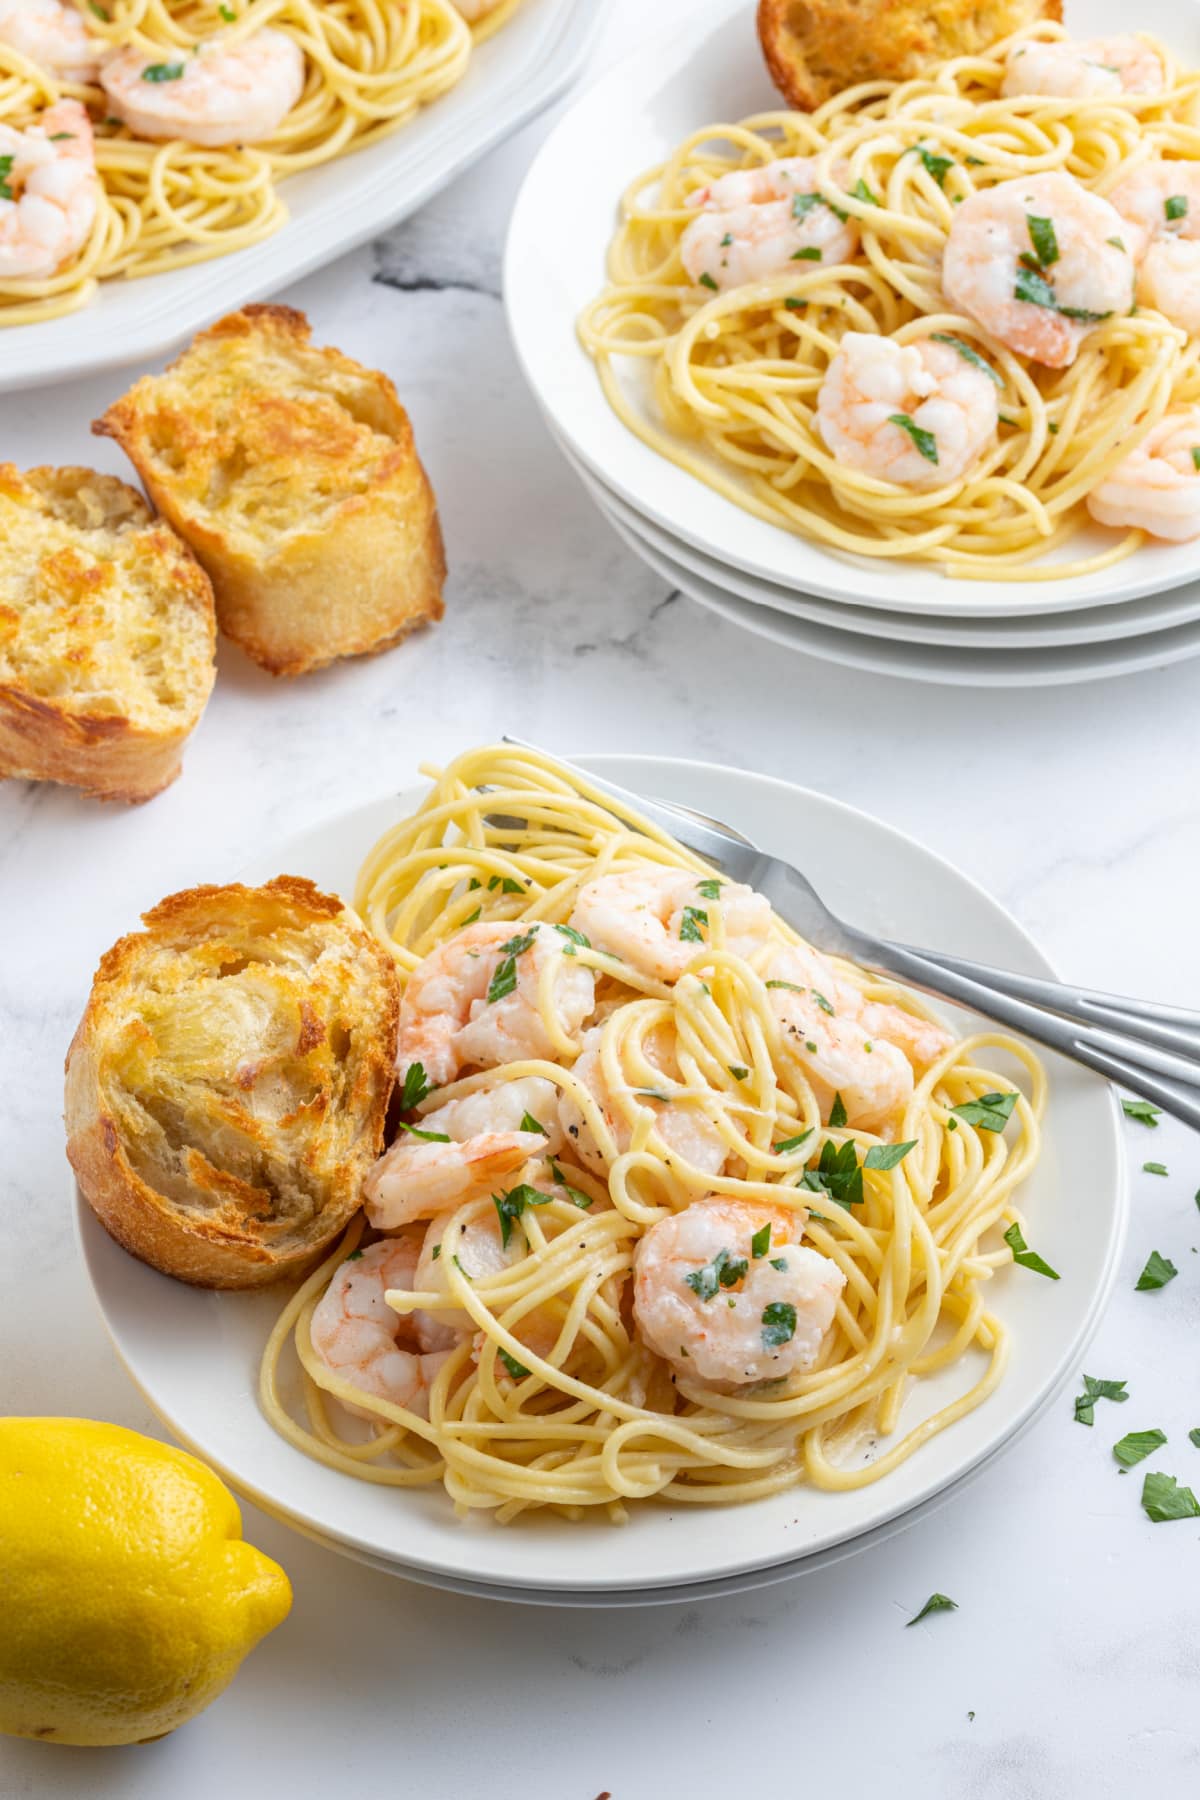 shrimp scampi serving on plate with pasta and bread